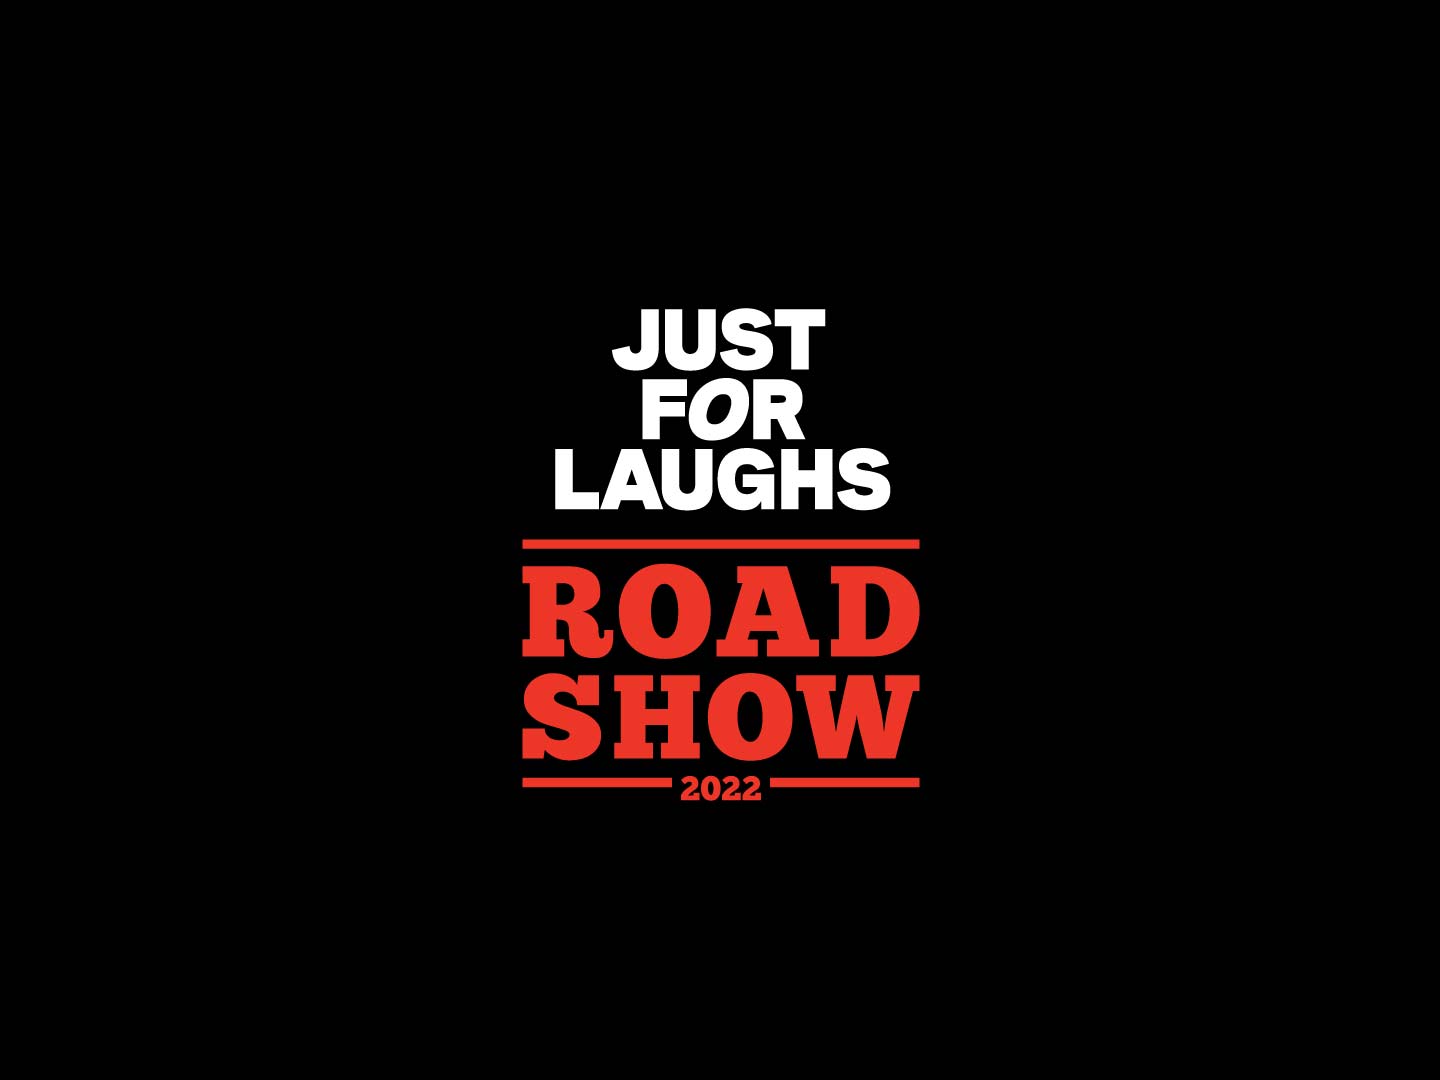 The Just for Laughs Road Show Tour